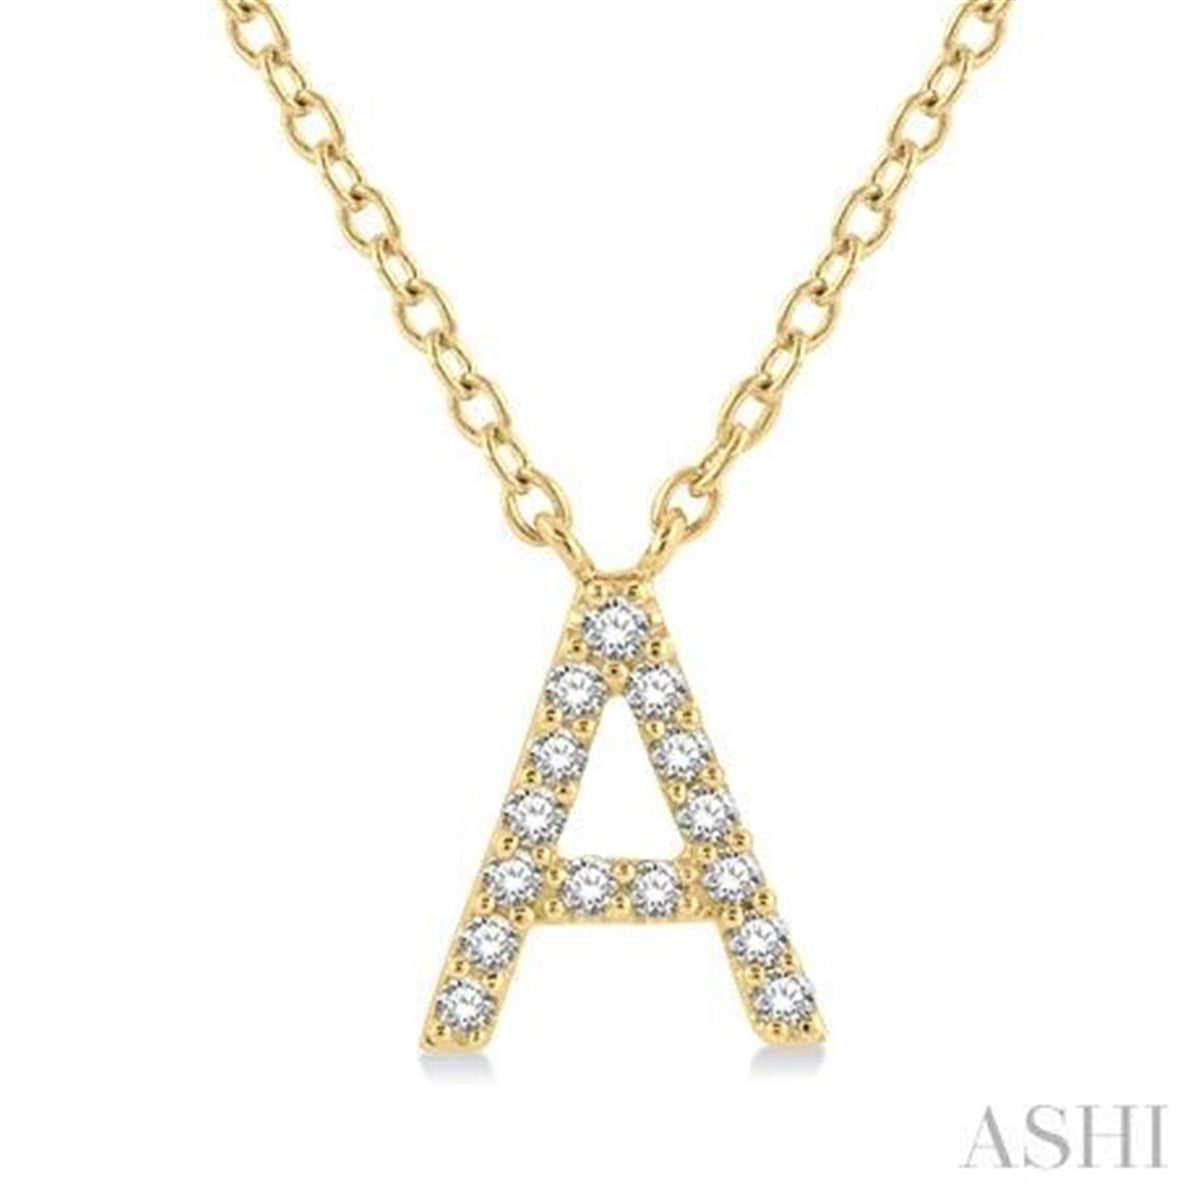 10Kt Yellow Gold Initial A Pendant with 0.05cttw Natural Diamonds